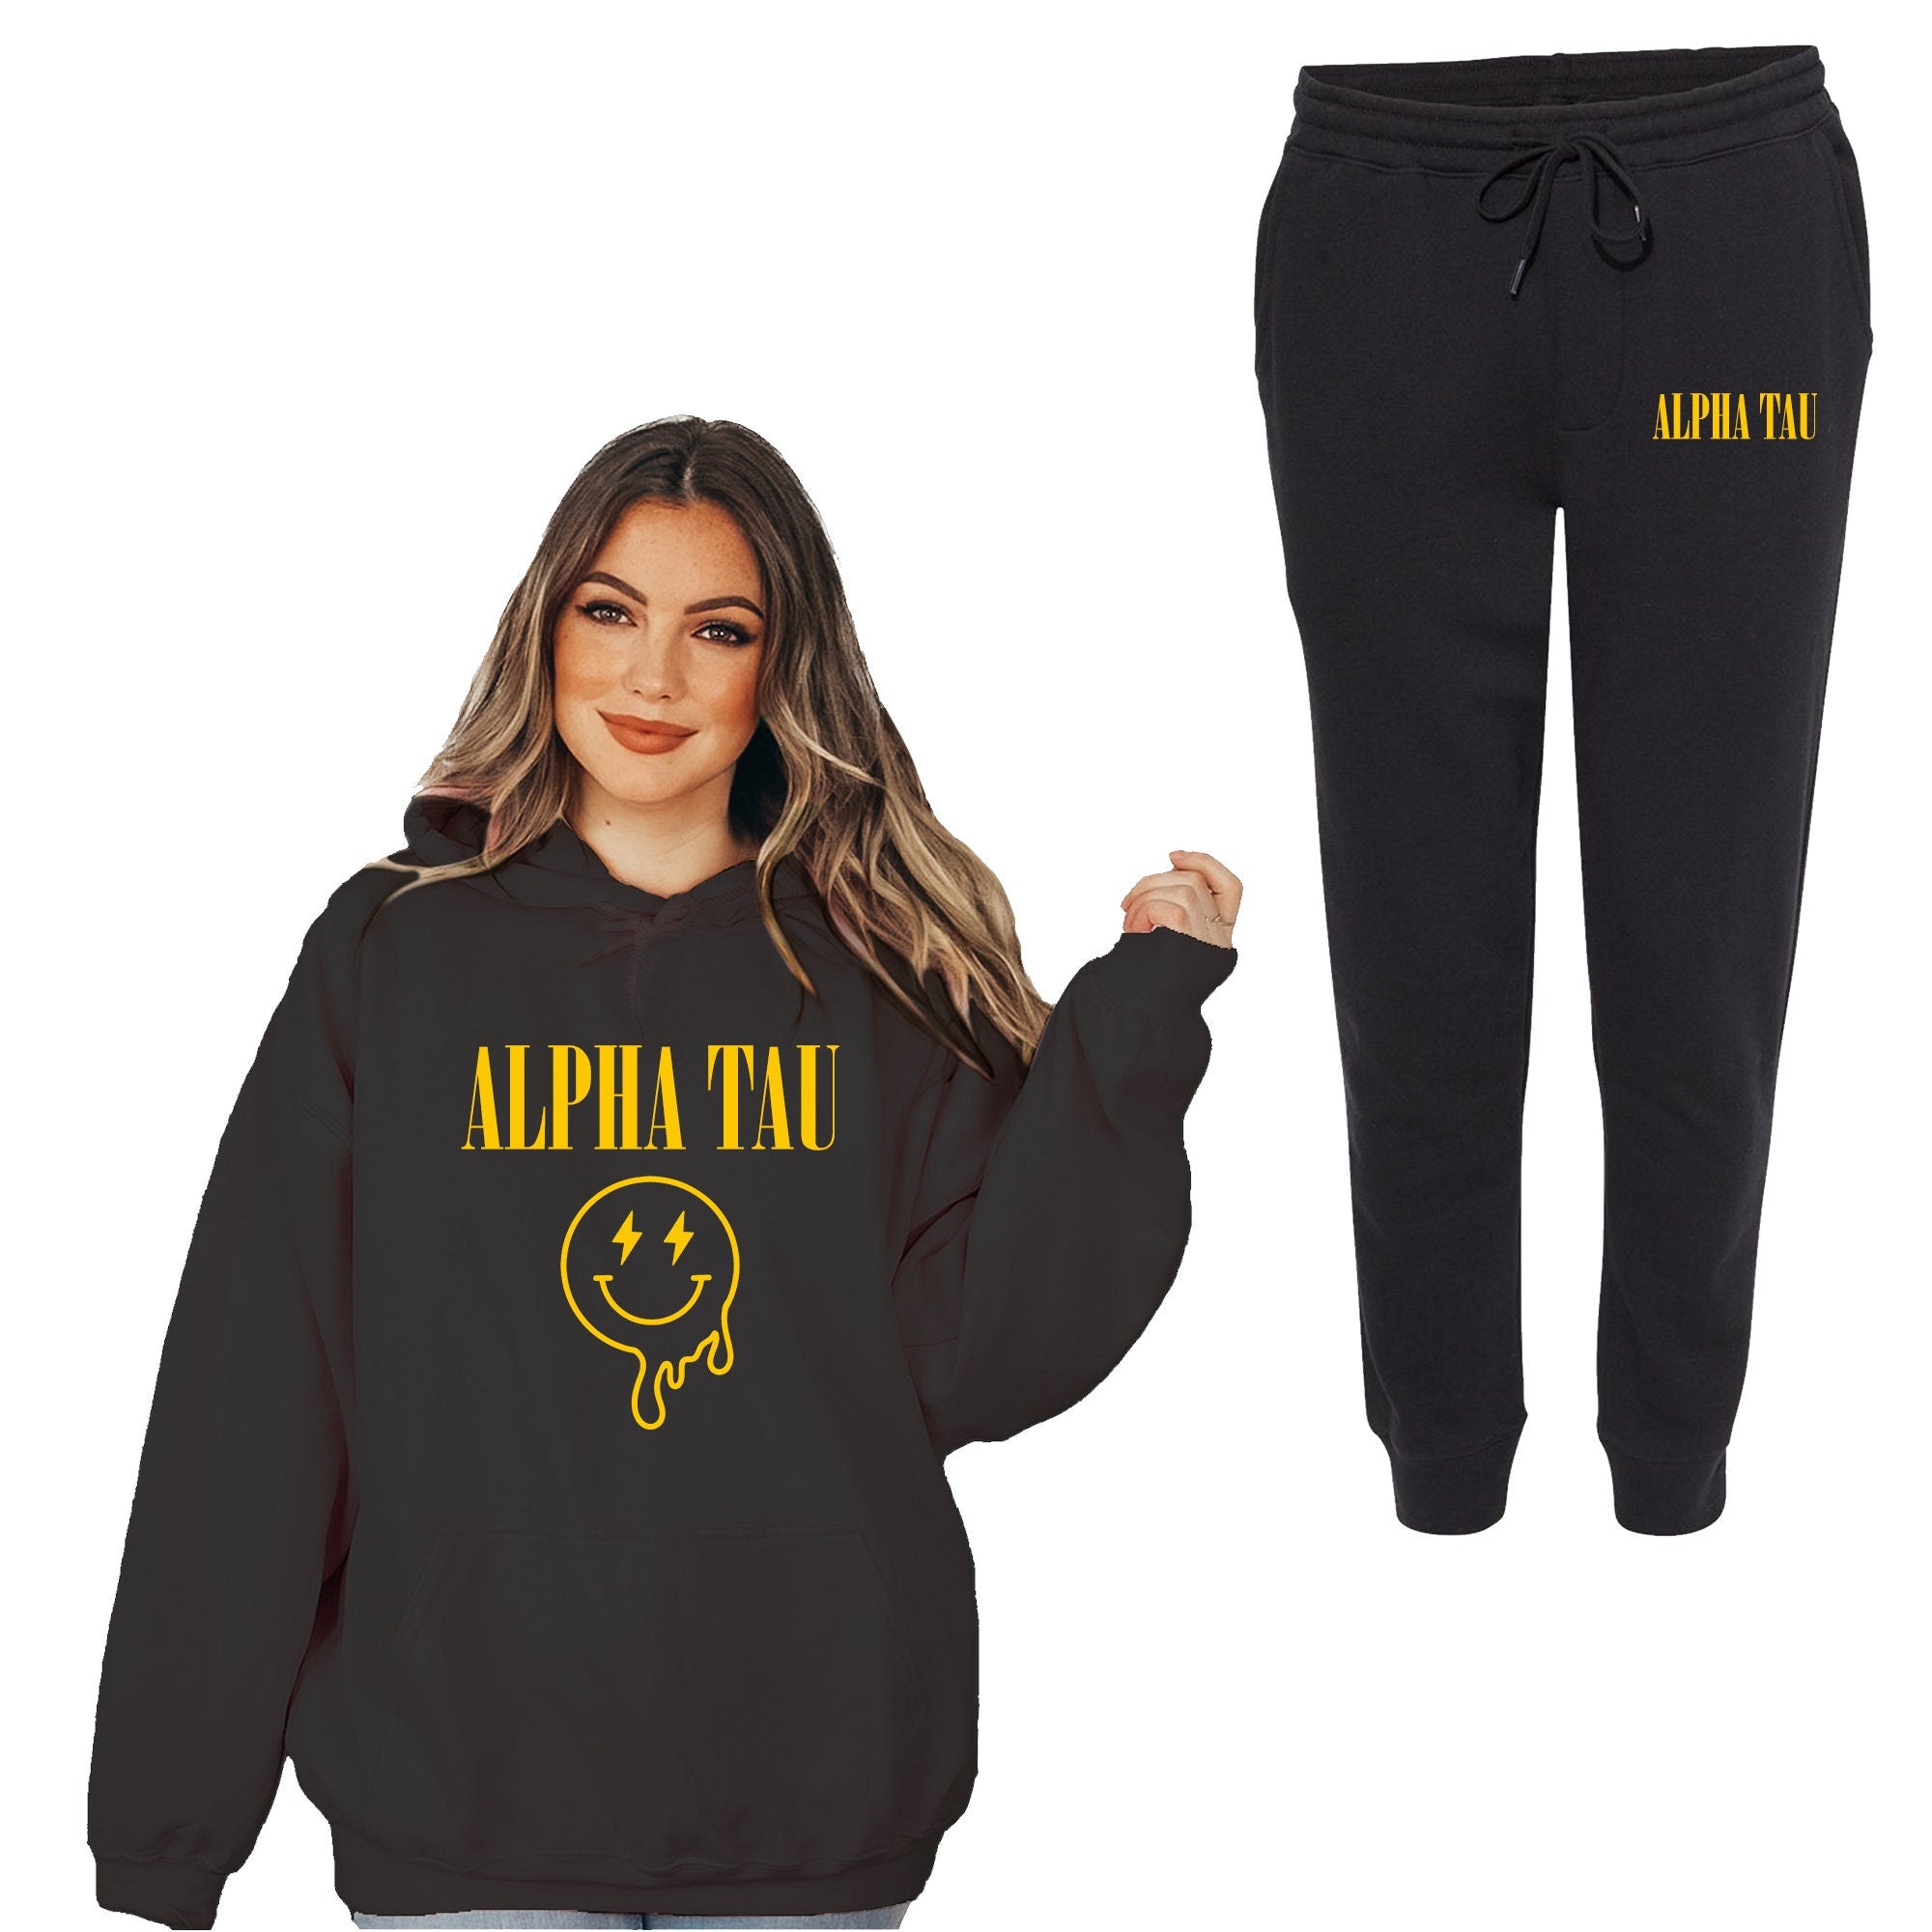 Alpha Sigma Tau Dripping Smiley Face Sweatsuit - Go Greek Chic